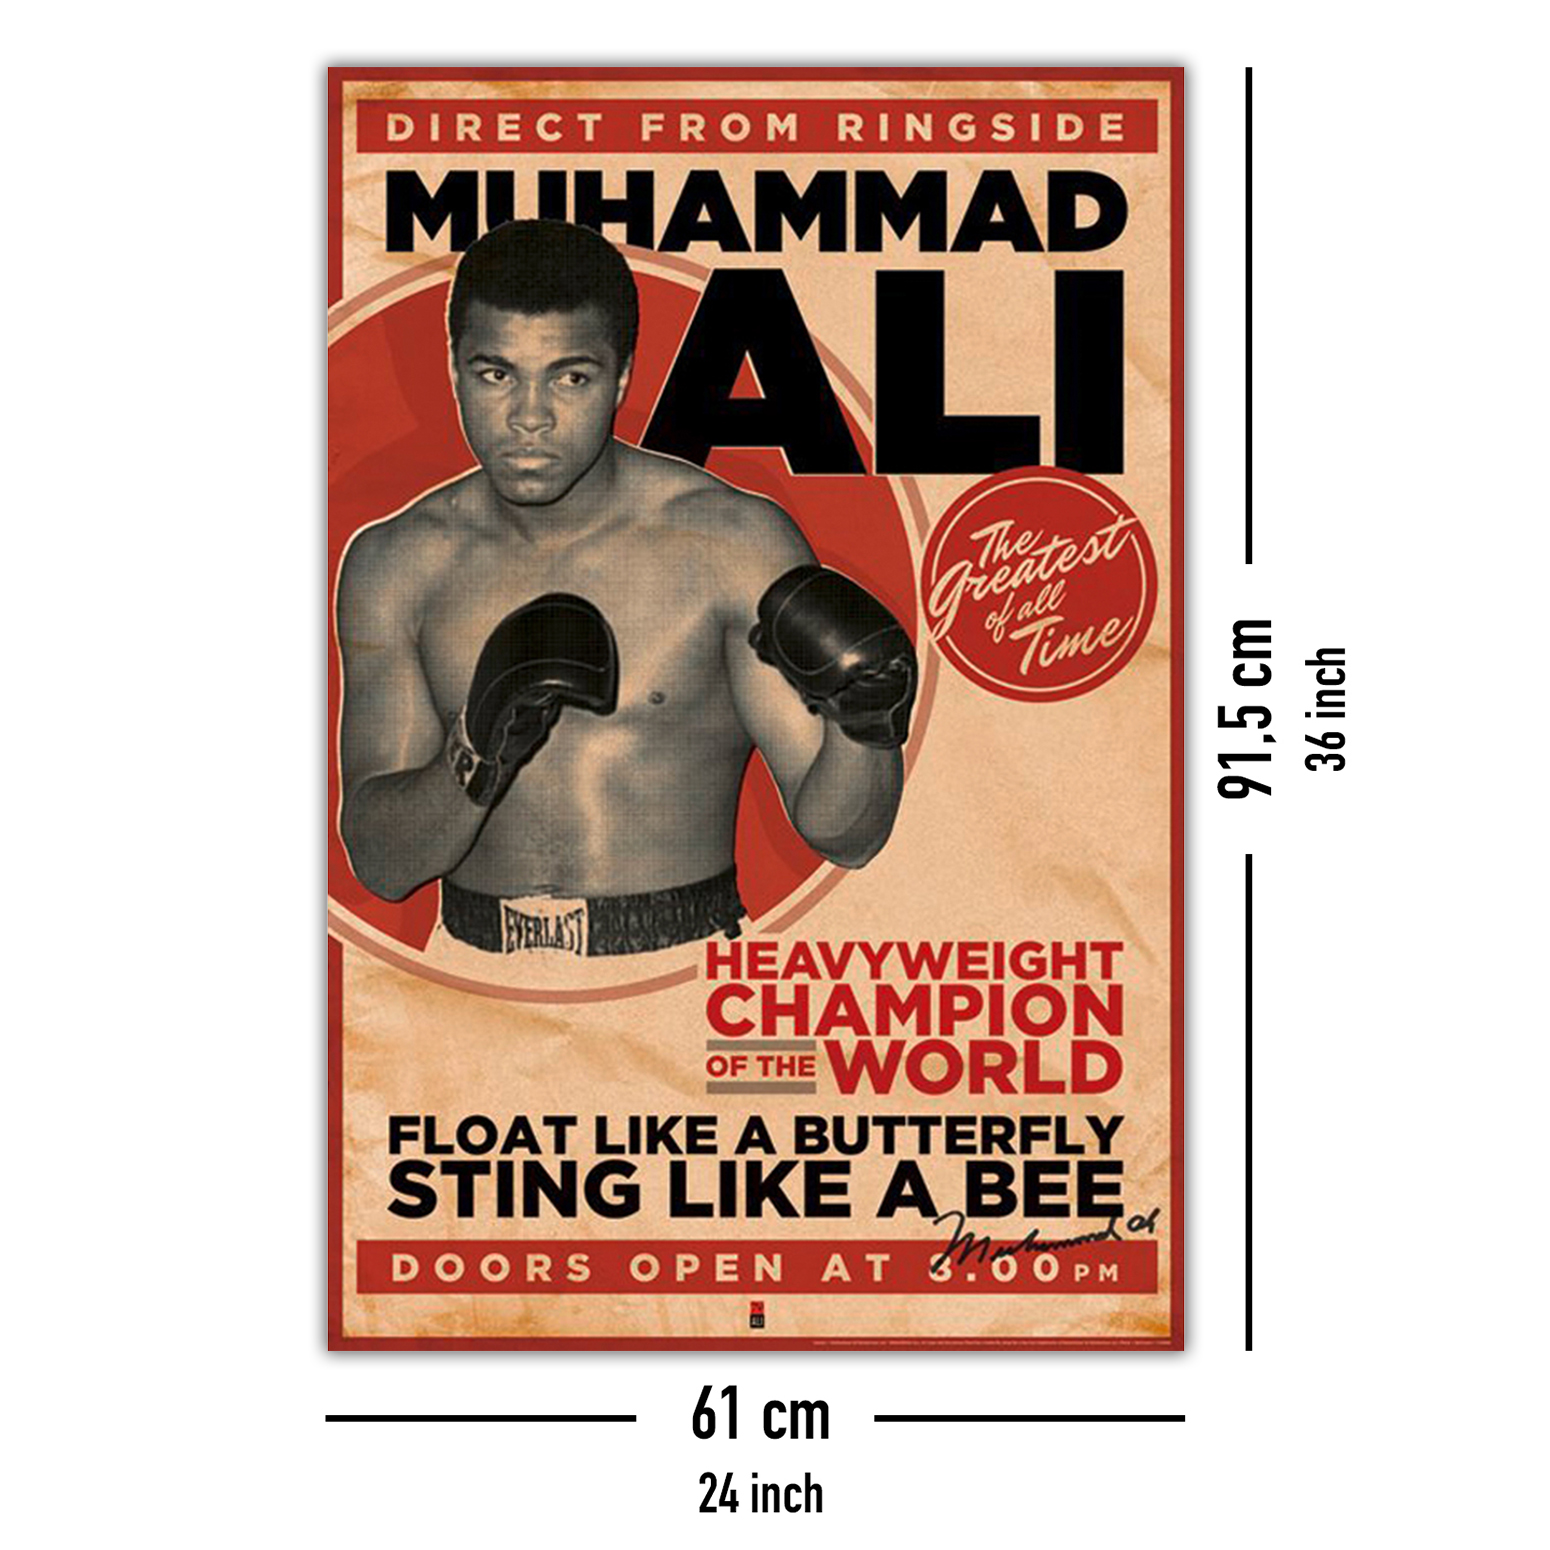 20 Muhammad Ali boxing postcards classic images from boxing posters.   